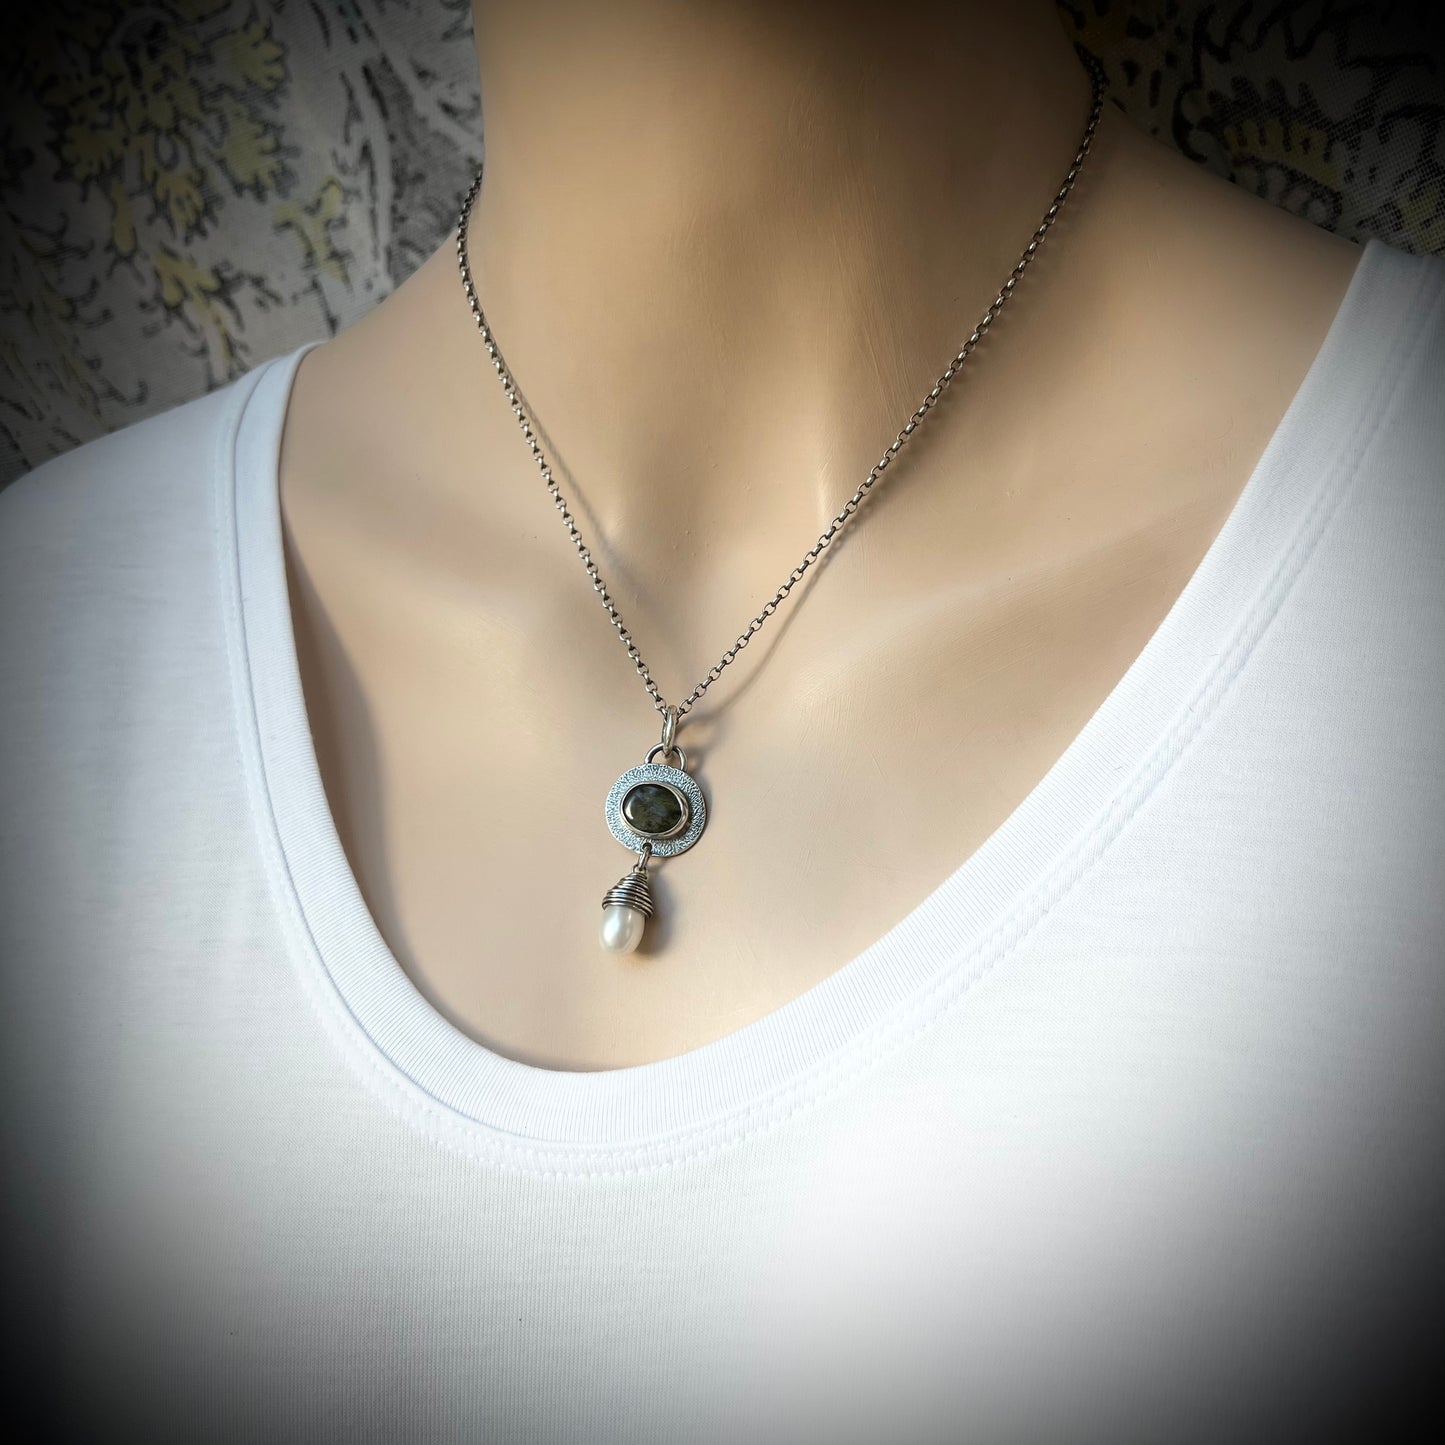 Sterling Silver Opal and Pearl Necklace - Genuine Peruvian Opal and Fresh Water Pearl Pendant - Handmade Jewelry Unique Gift for Her